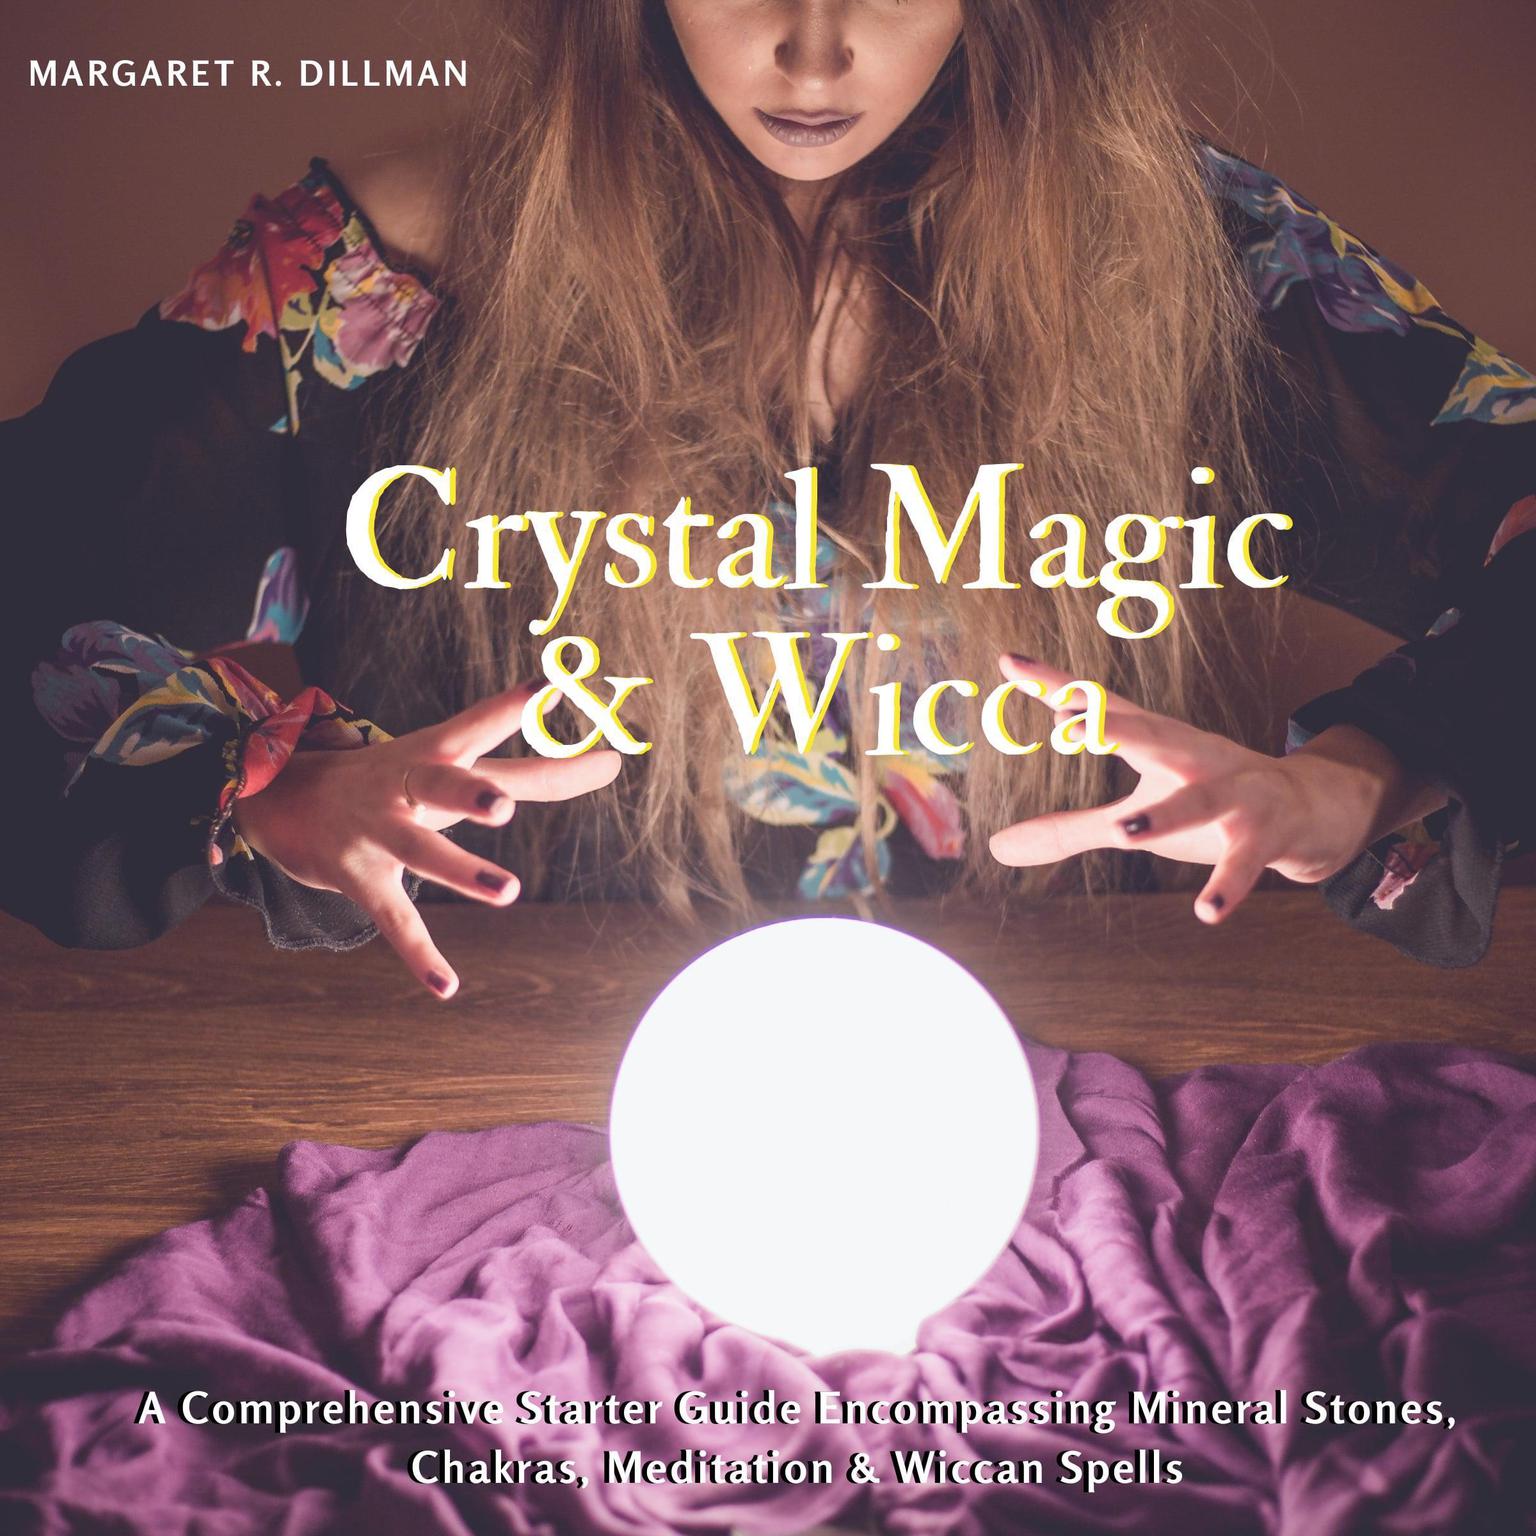 Crystal Magic & Wicca: A Comprehensive Starter Guide Encompassing Mineral Stones, Chakras, Meditation & Wiccan Spells Audiobook, by Margaret R Dillman